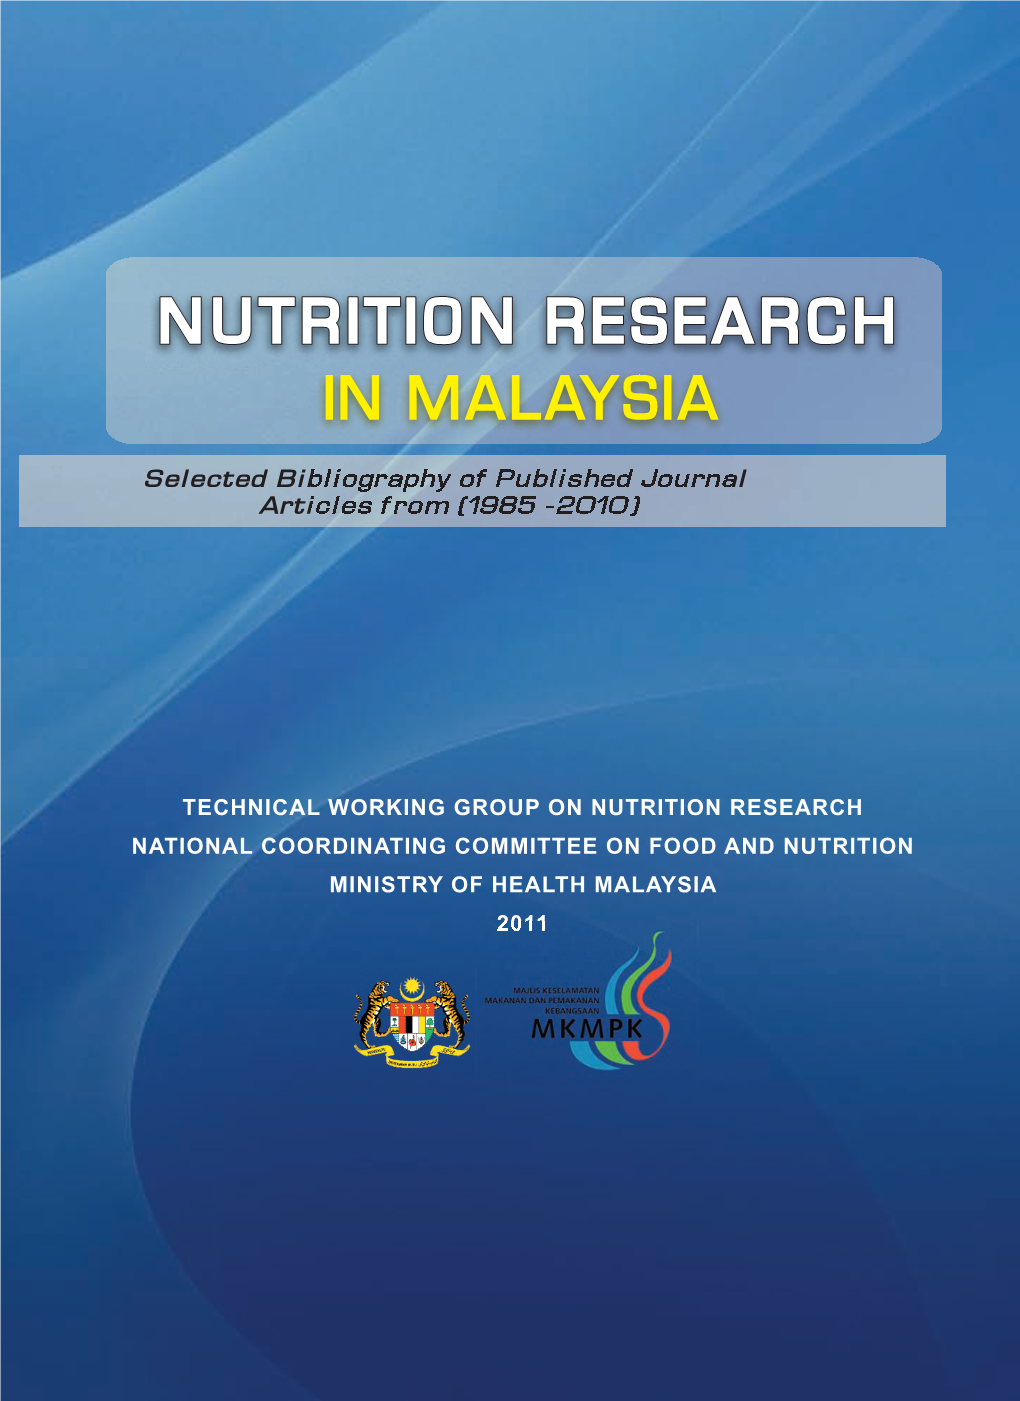 Nutrition Research in Malaysia.Pdf